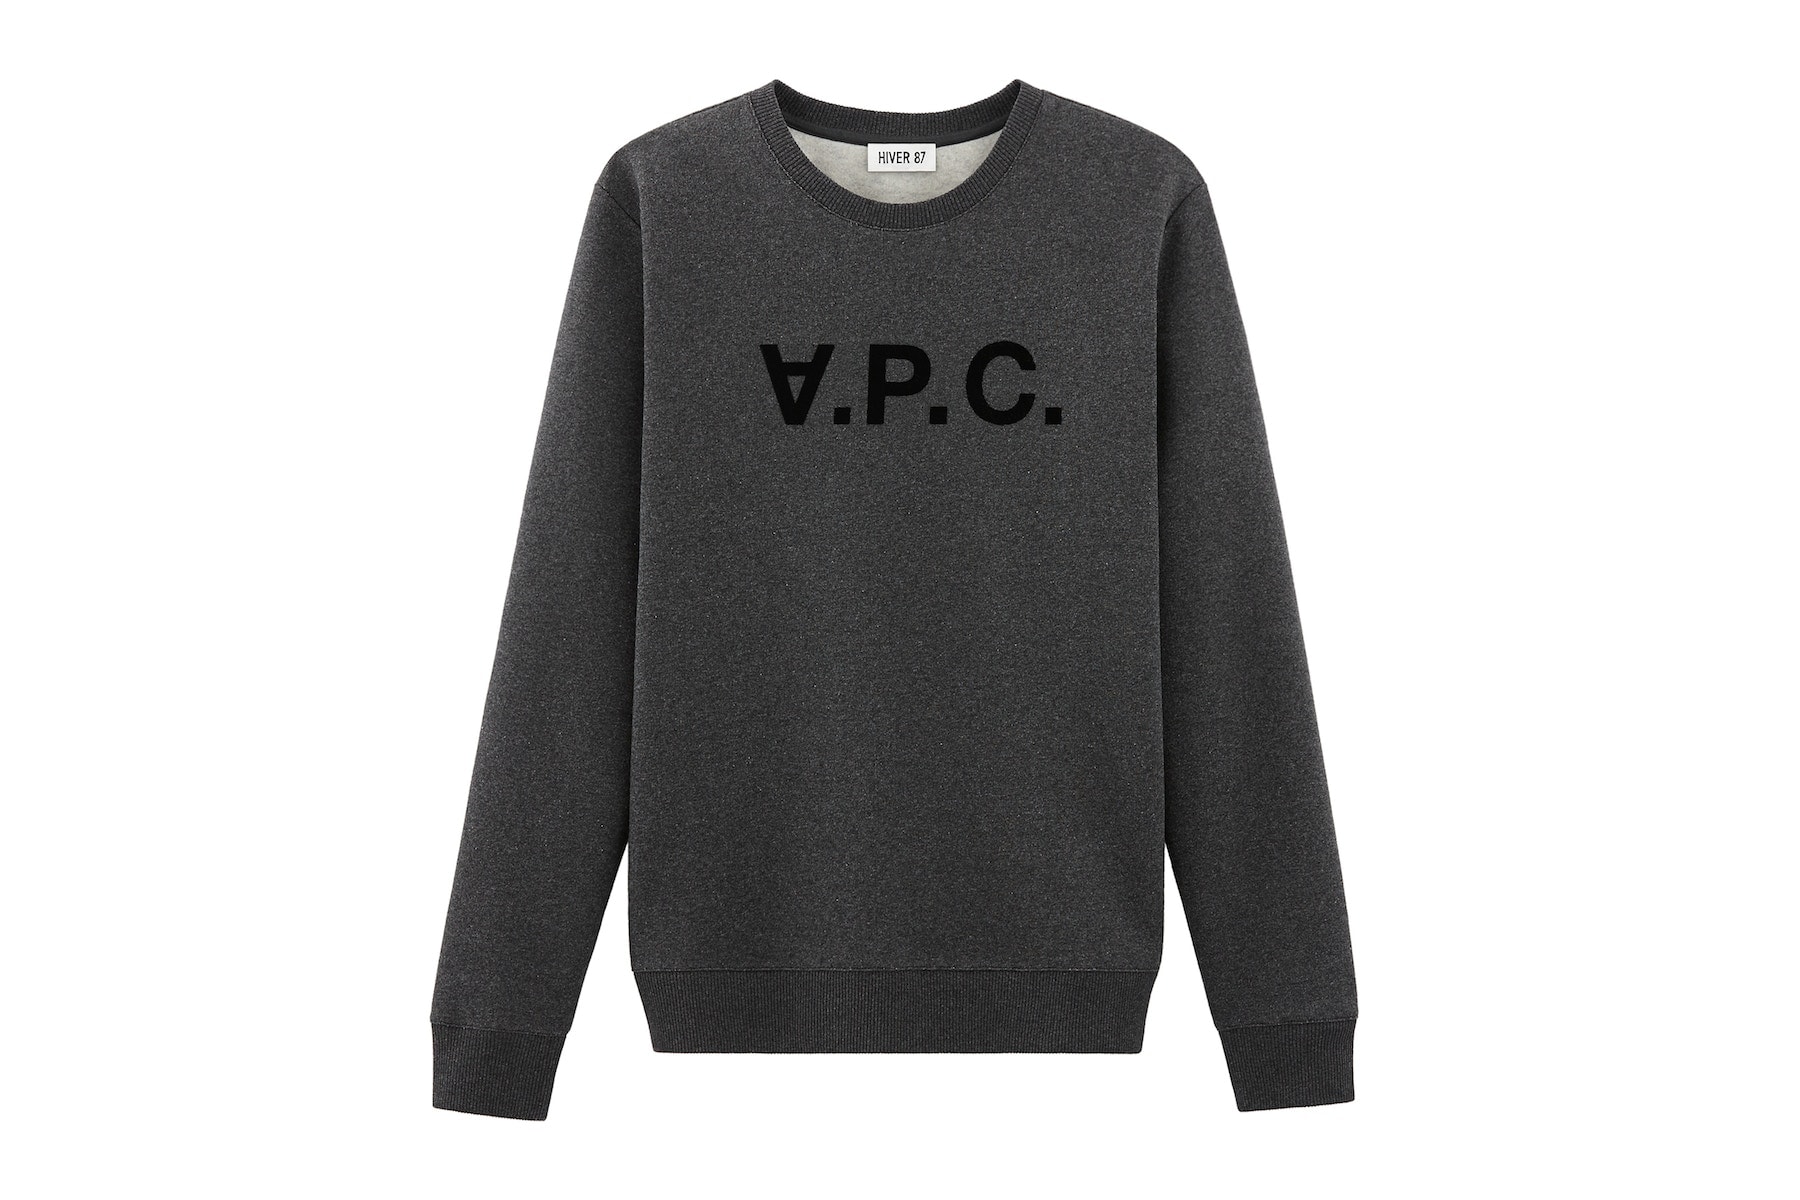 A.P.C. "HIVER 87" 30th Anniversary Products